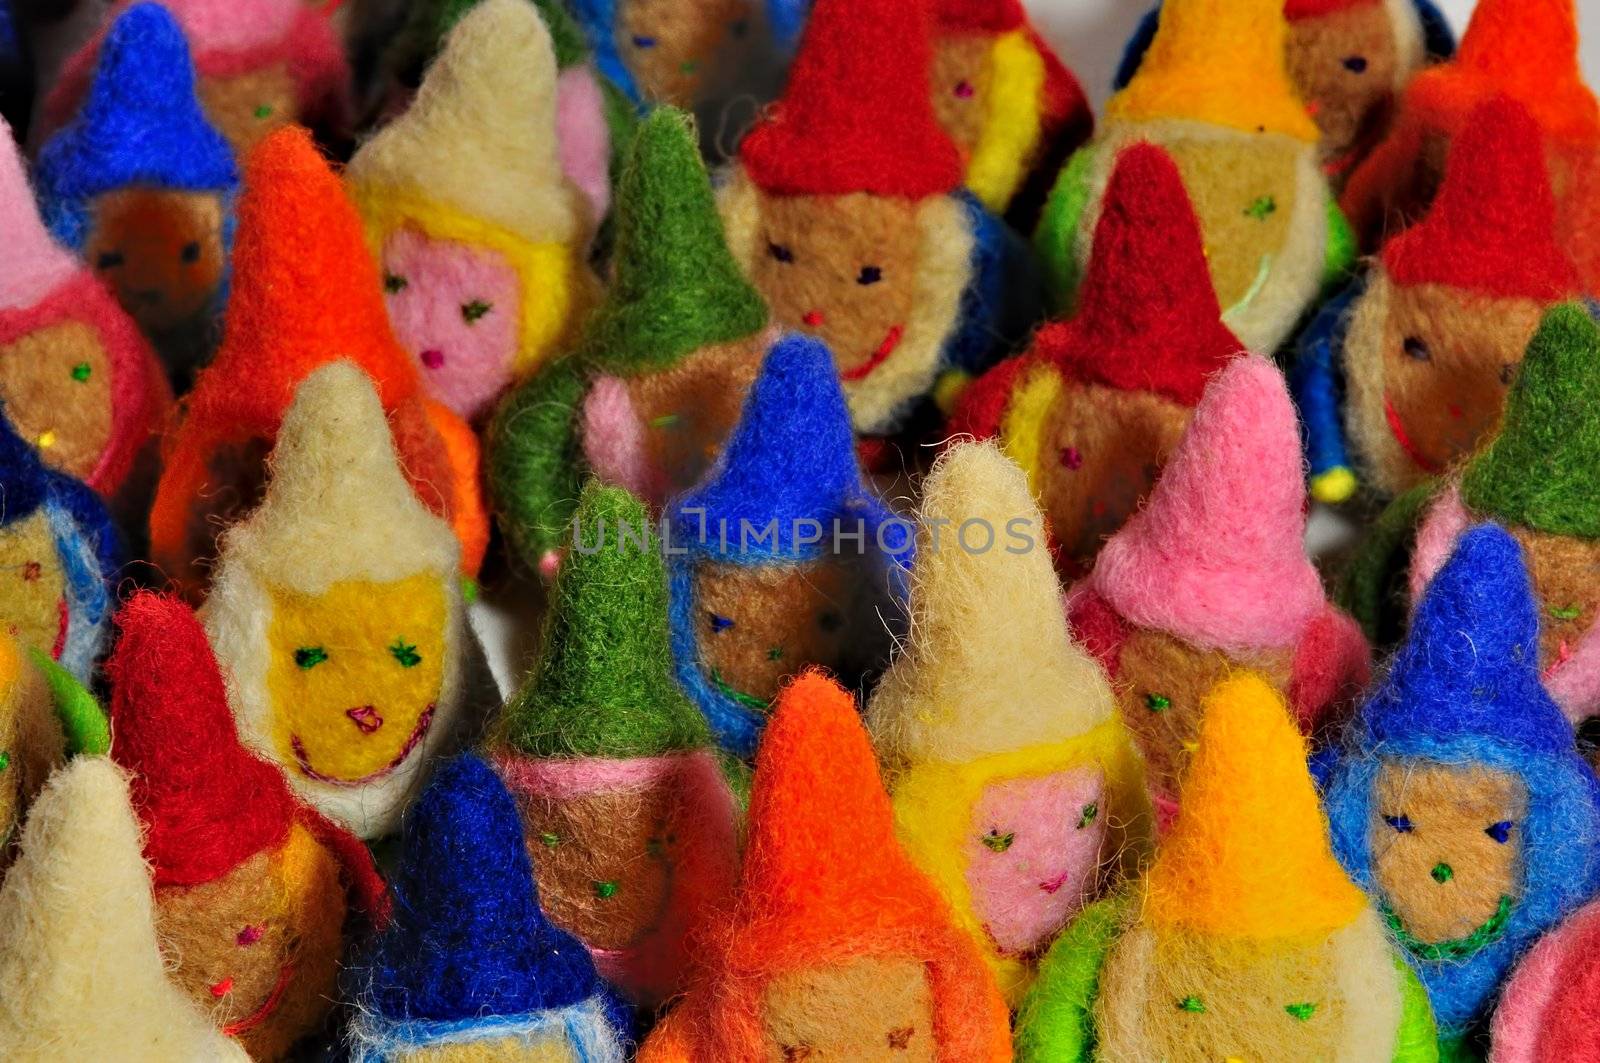 soft toys - many colored gnomes, close-up